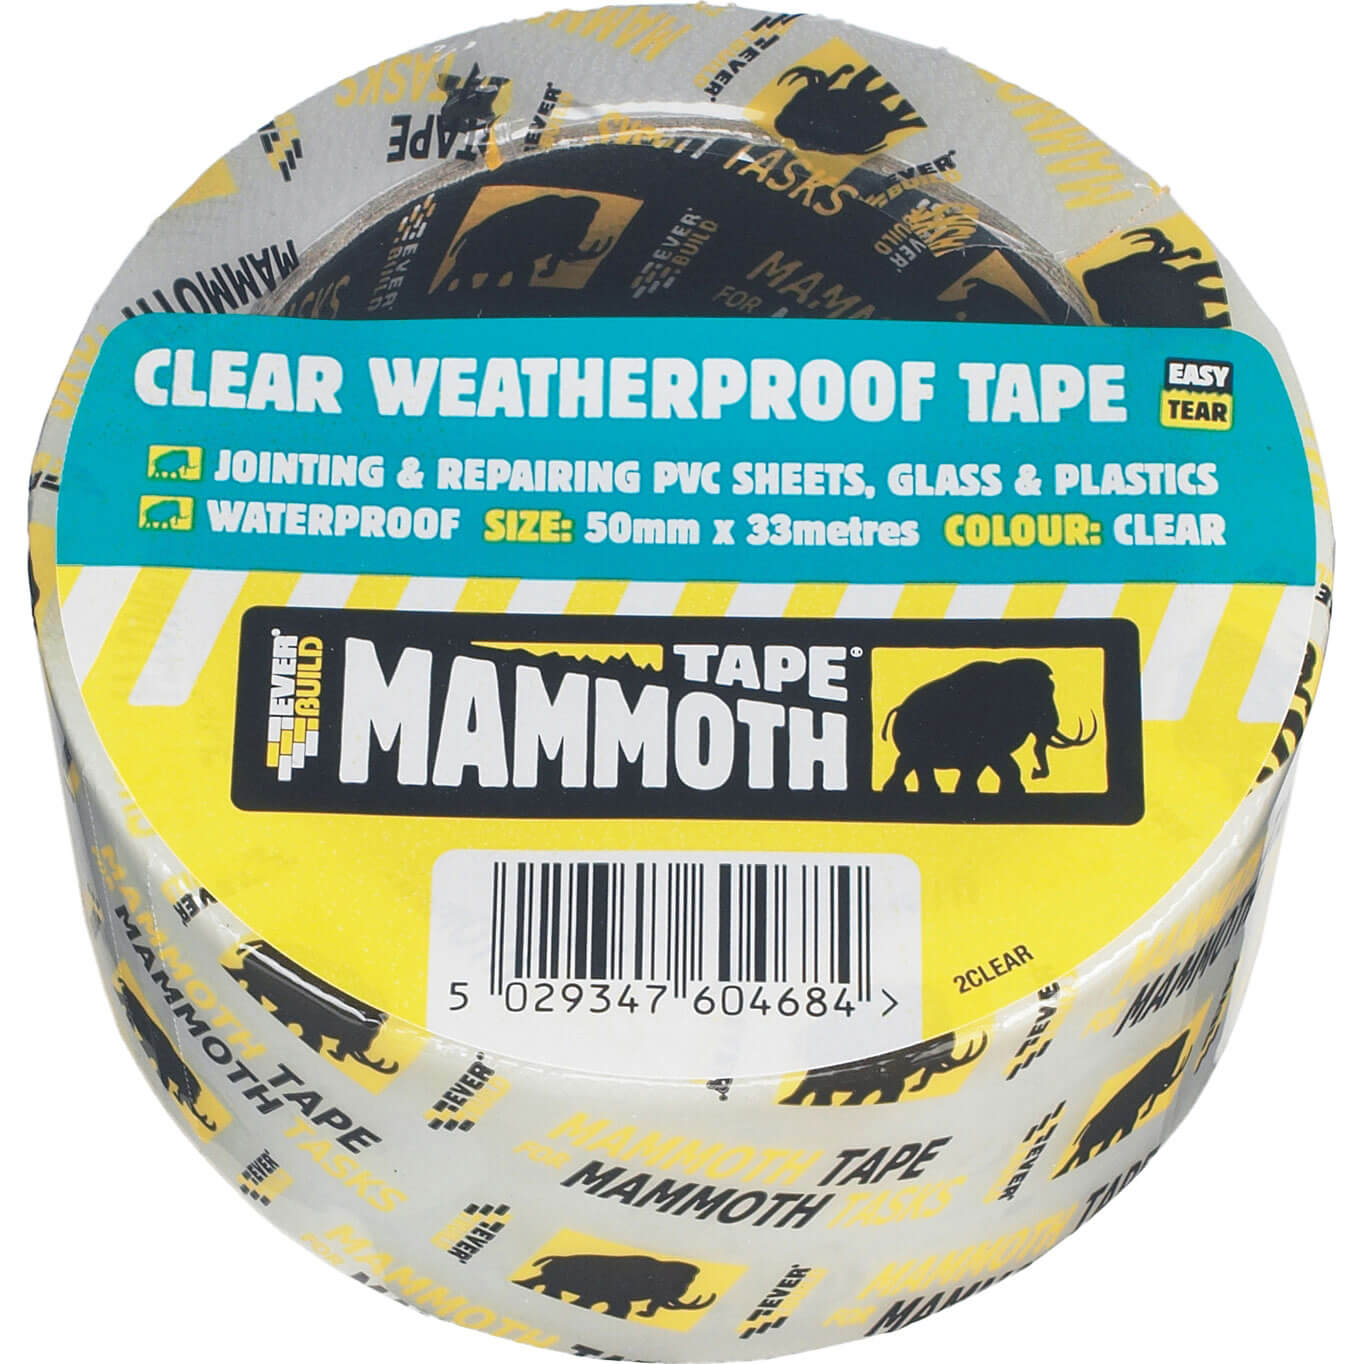 Image of Everbuild Mammoth Weatherproof Clear Tape Clear 50mm 10m